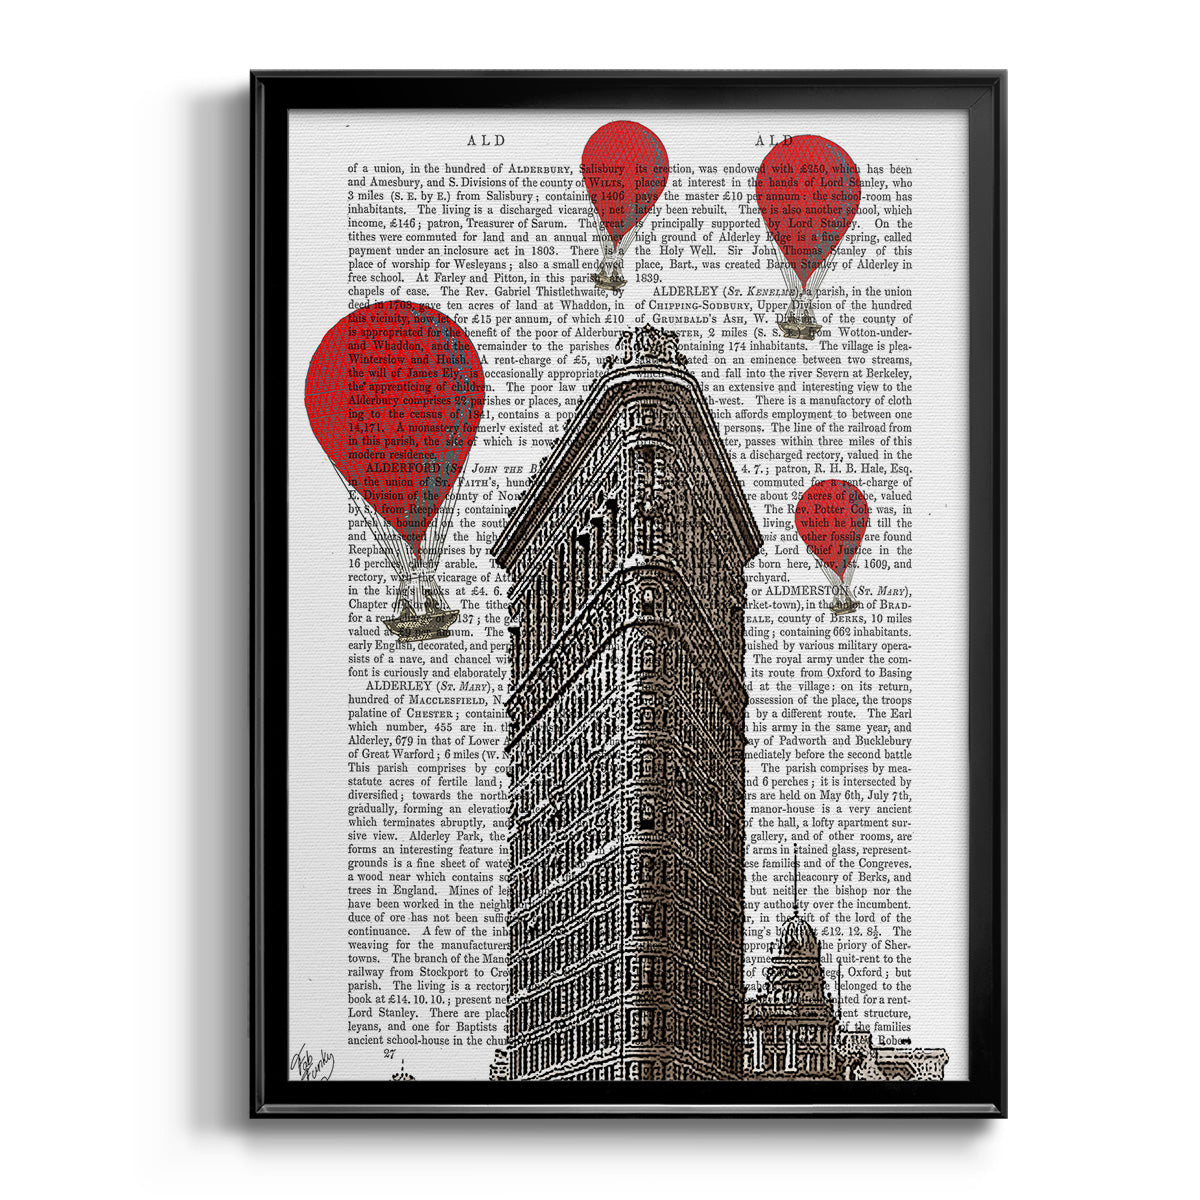 Flat Iron Building and Red Hot Air Balloons Premium Framed Print - Ready to Hang